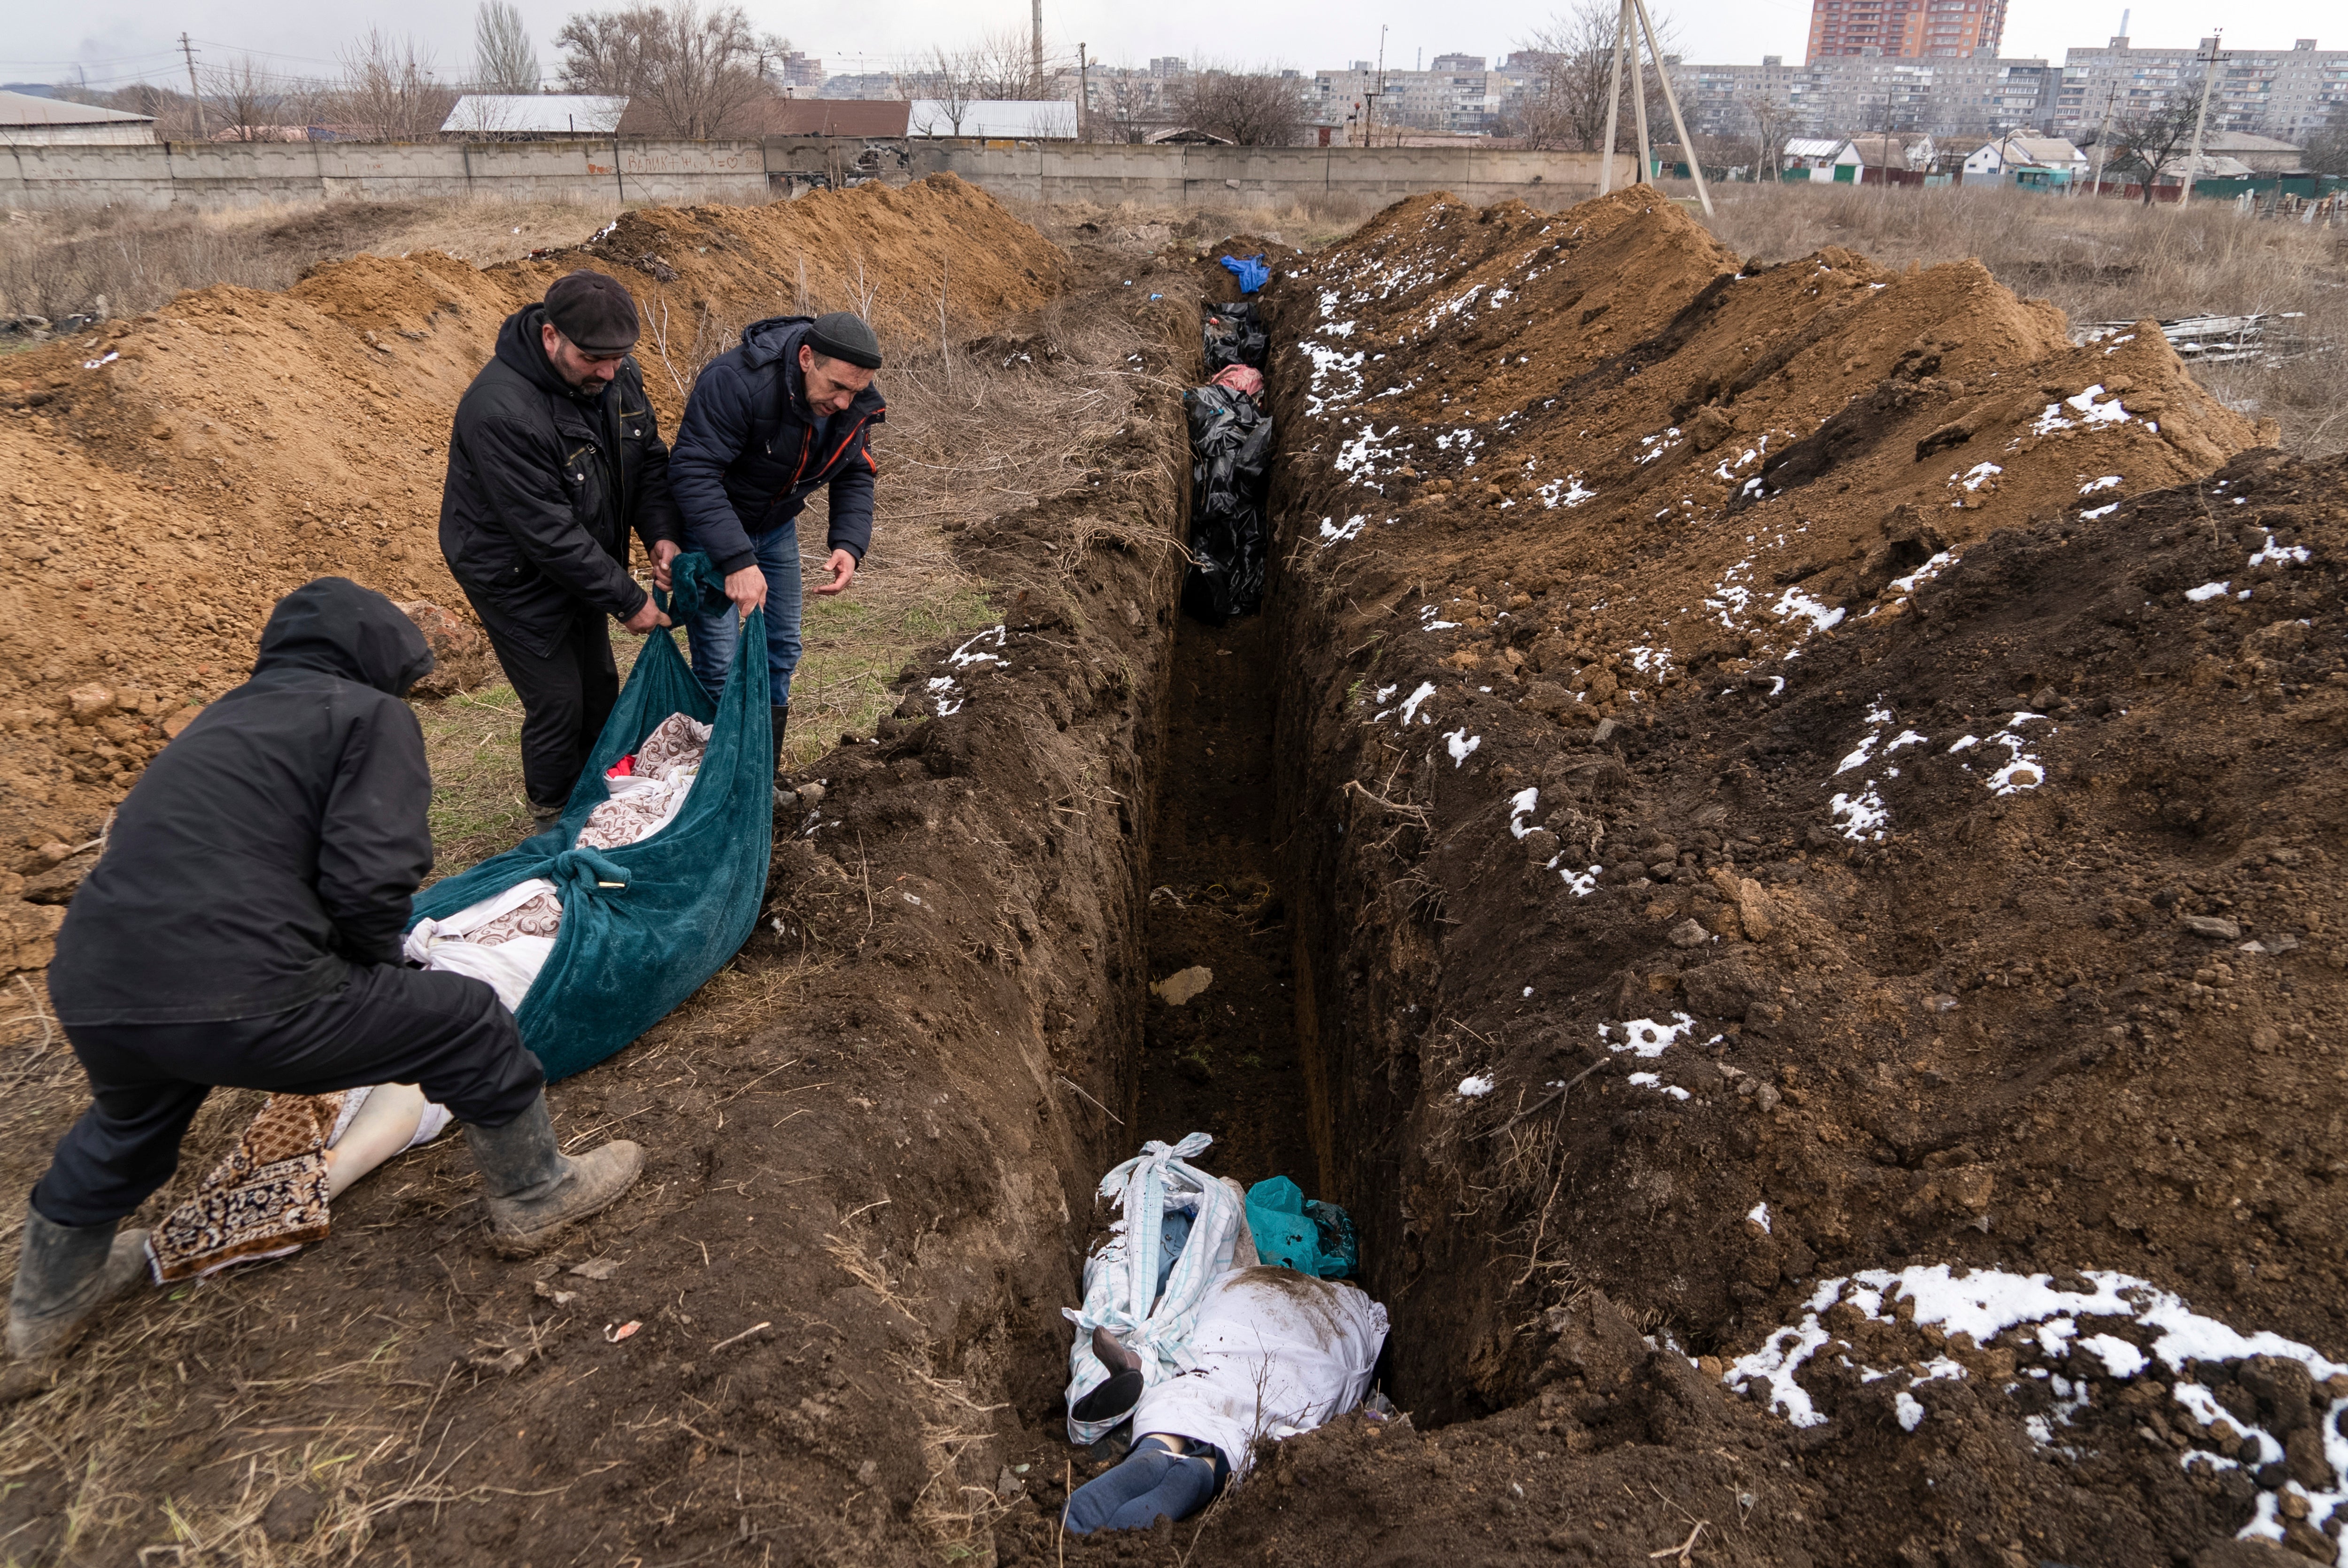 Dead bodies are buried in a mass grave in Mariupol